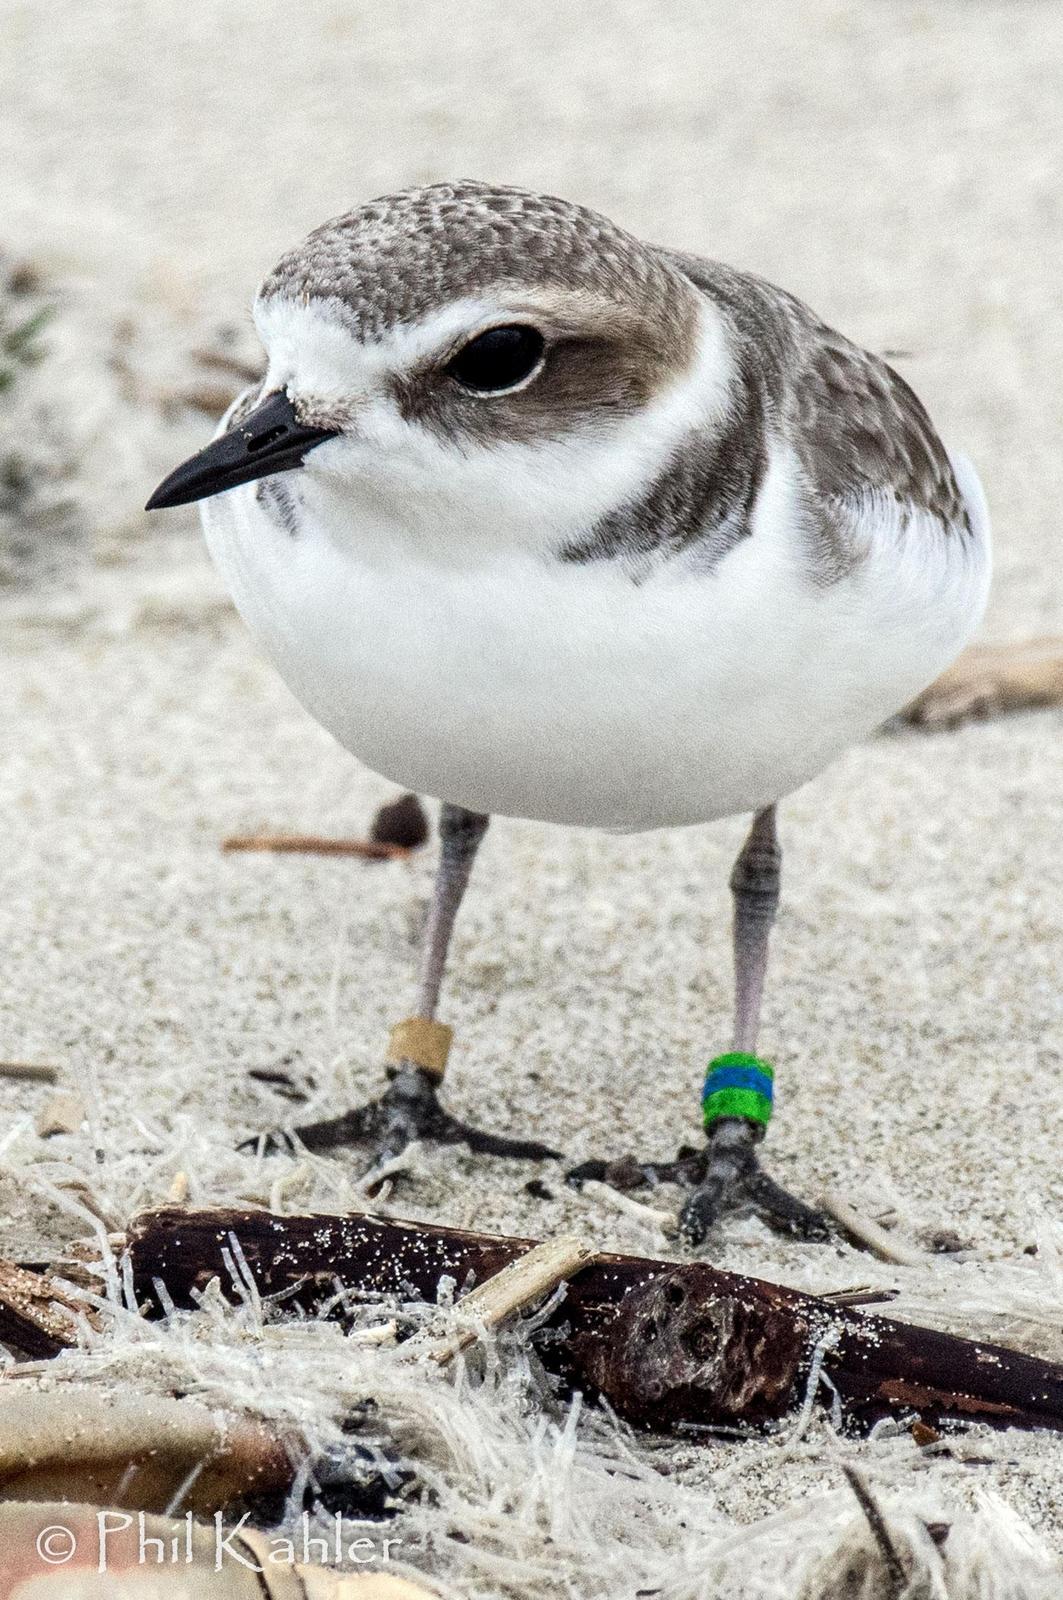 Snowy Plover Photo by Phil Kahler